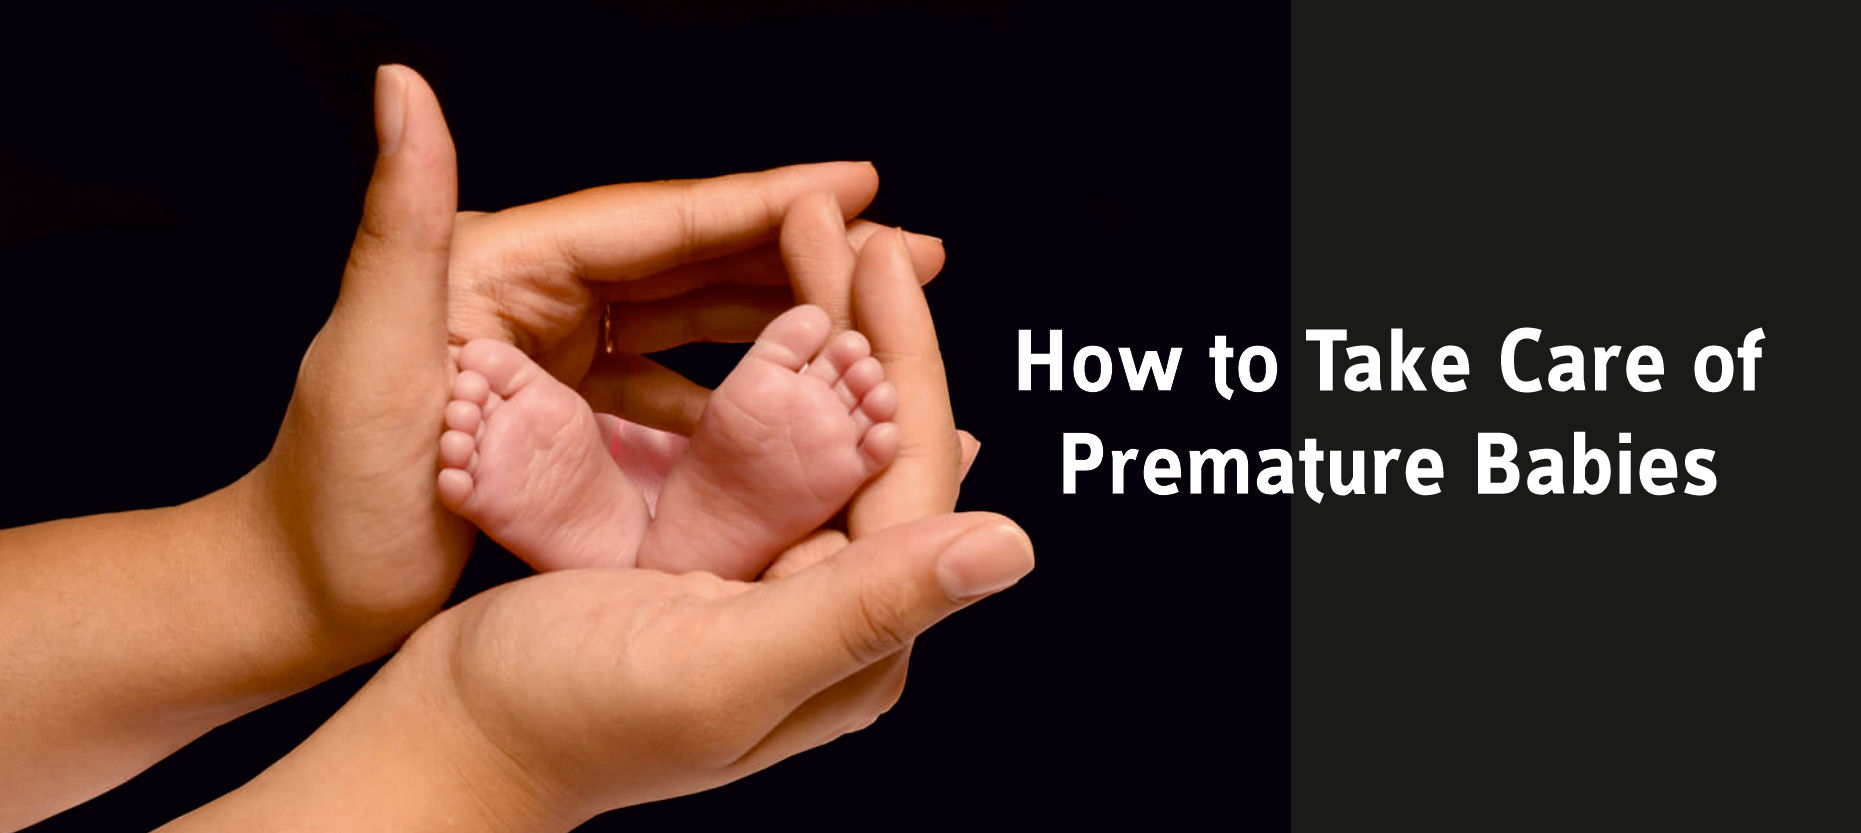 How to Take Care of Premature Babies